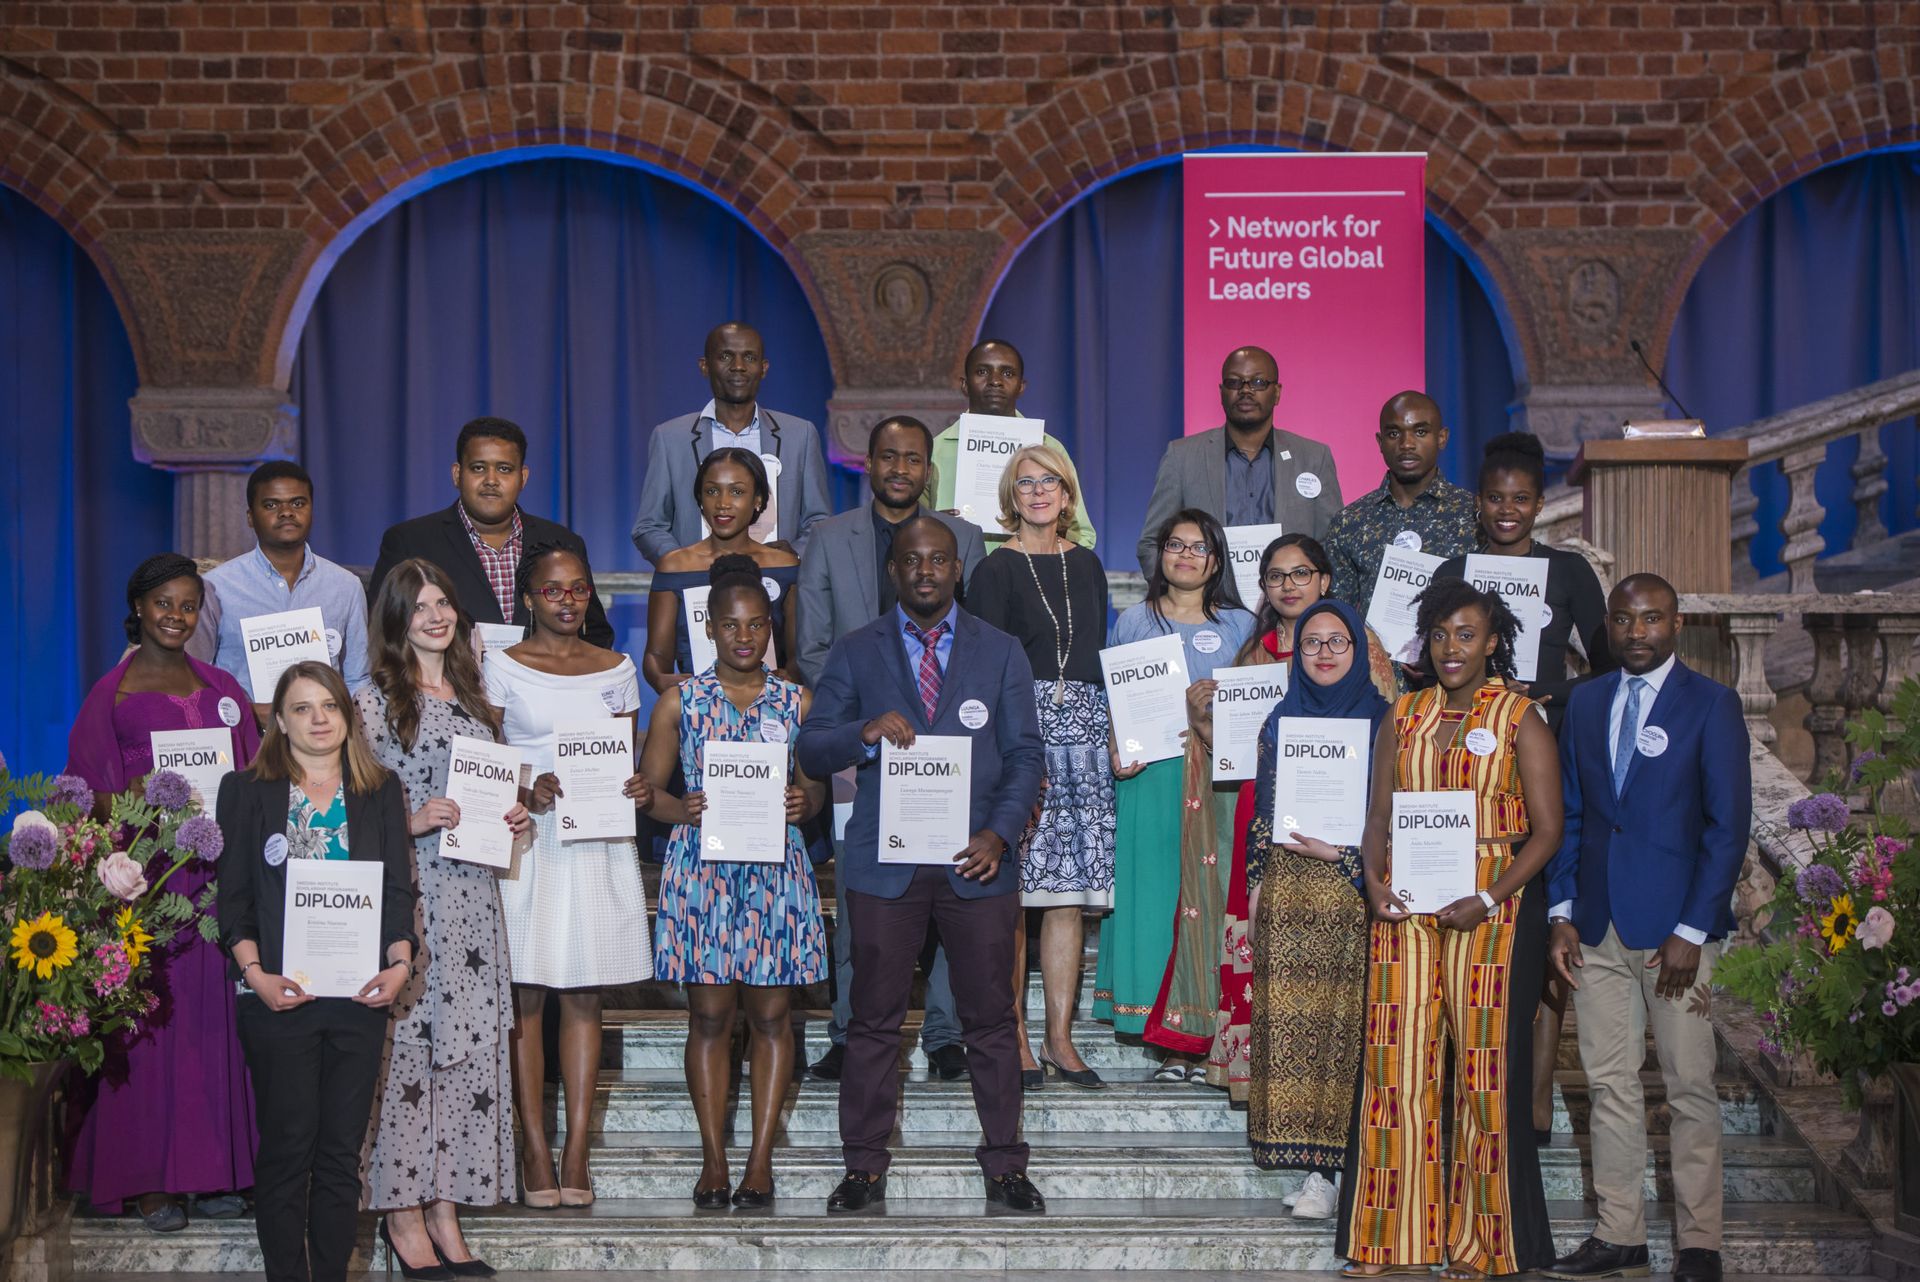 Swedish Institute scholarship recipients posing for a group photo at the graduation ceremony in Stockholm.